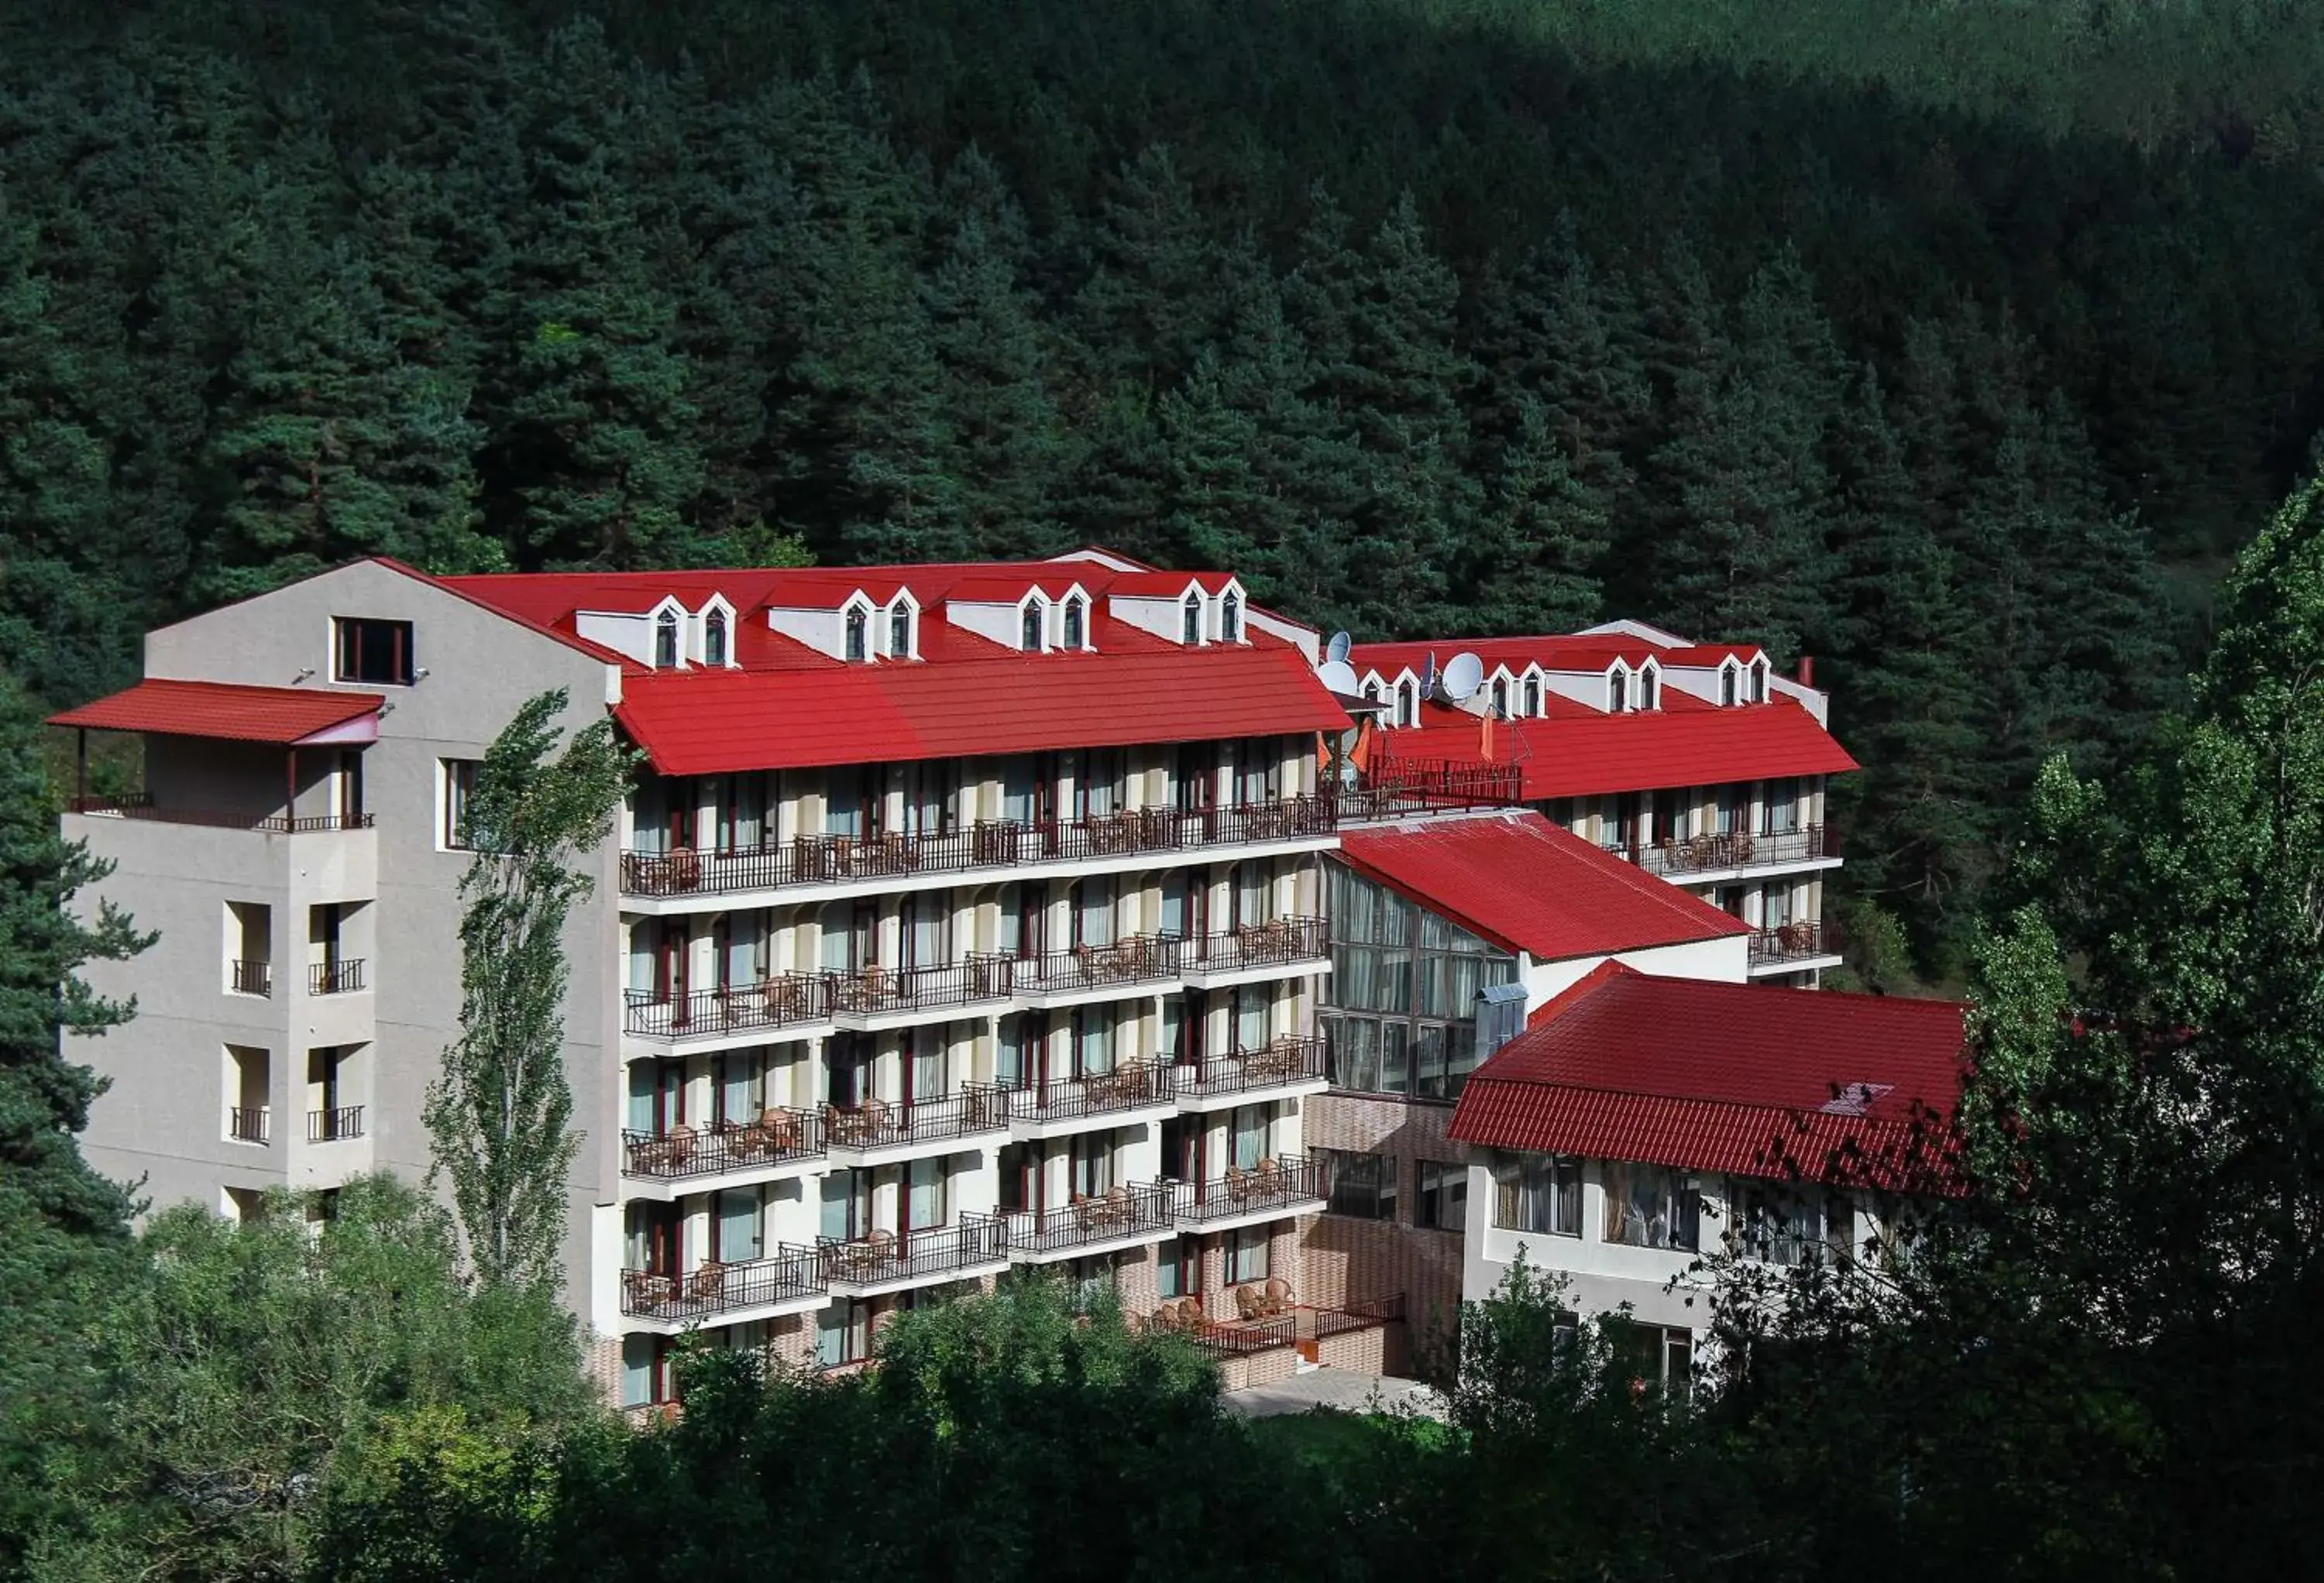 On site, Property Building in Best Western Plus Paradise Hotel Dilijan